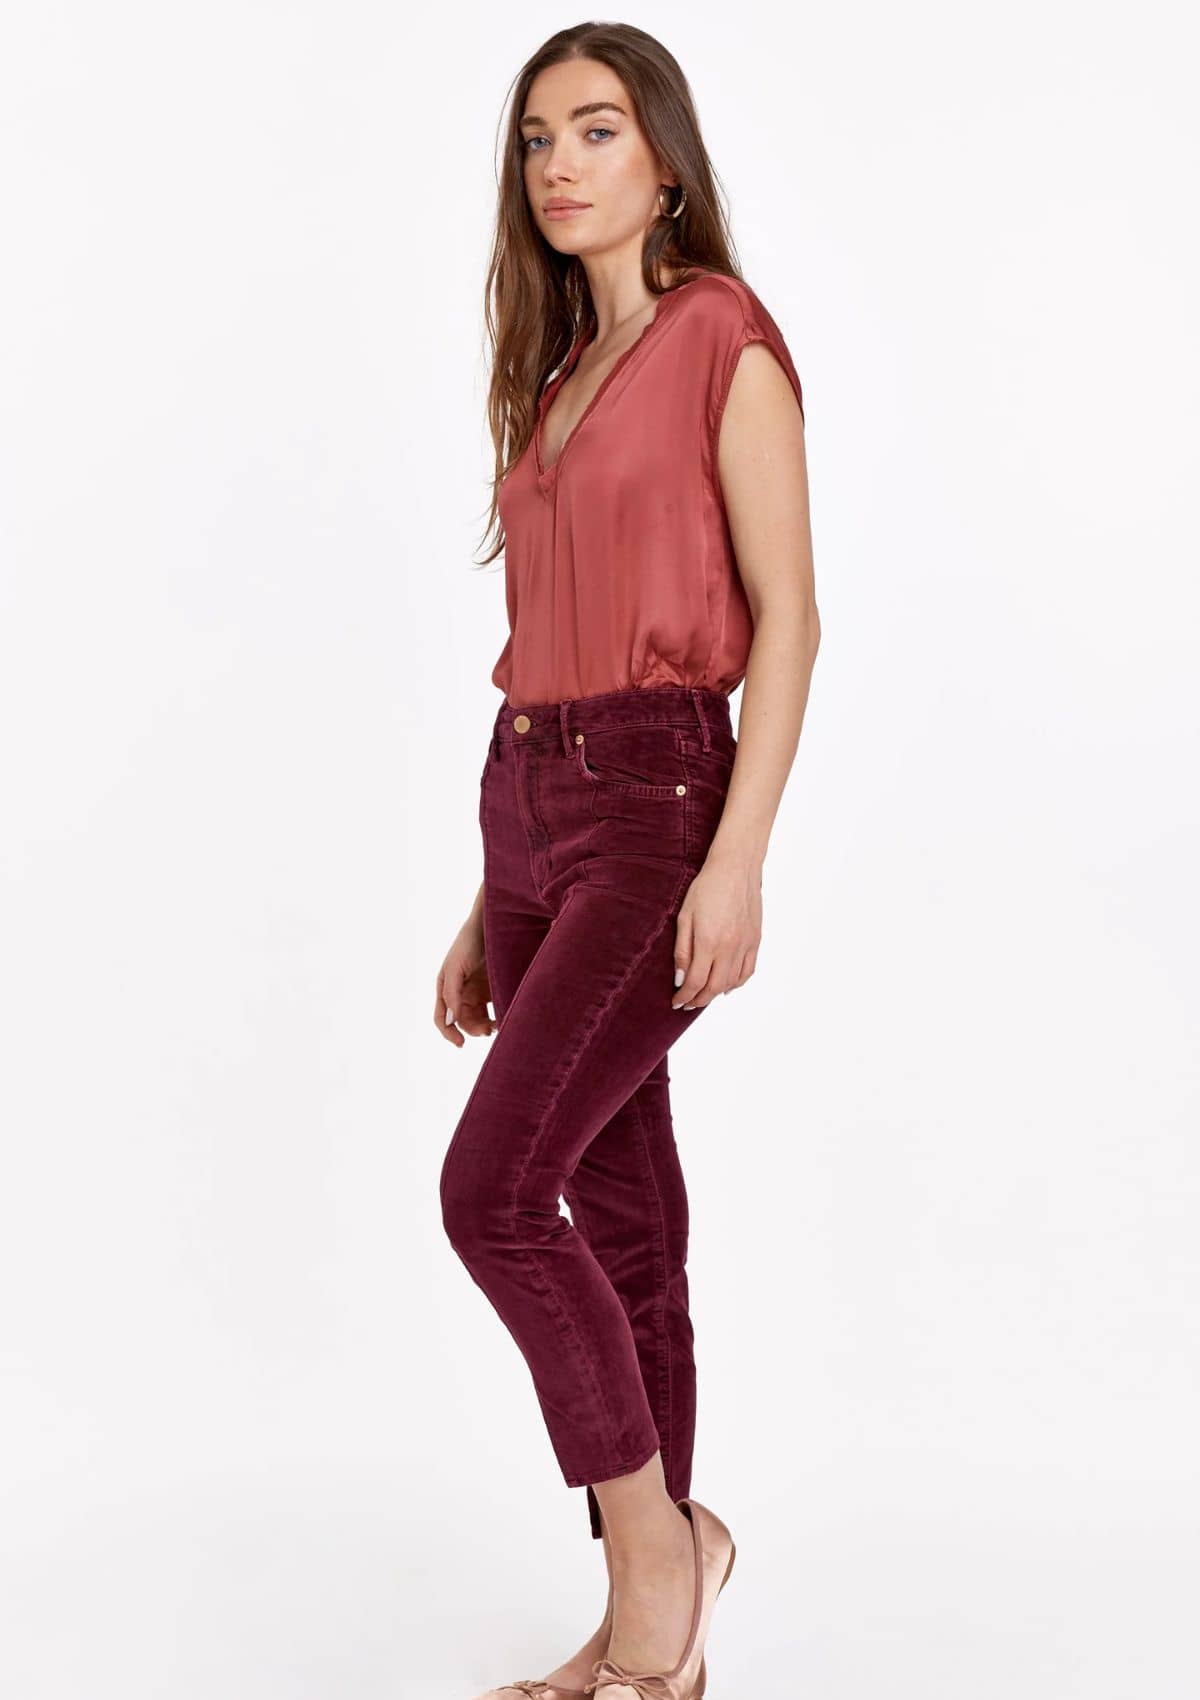 Mid-calf length red jeans paired with tucked in red cami top.